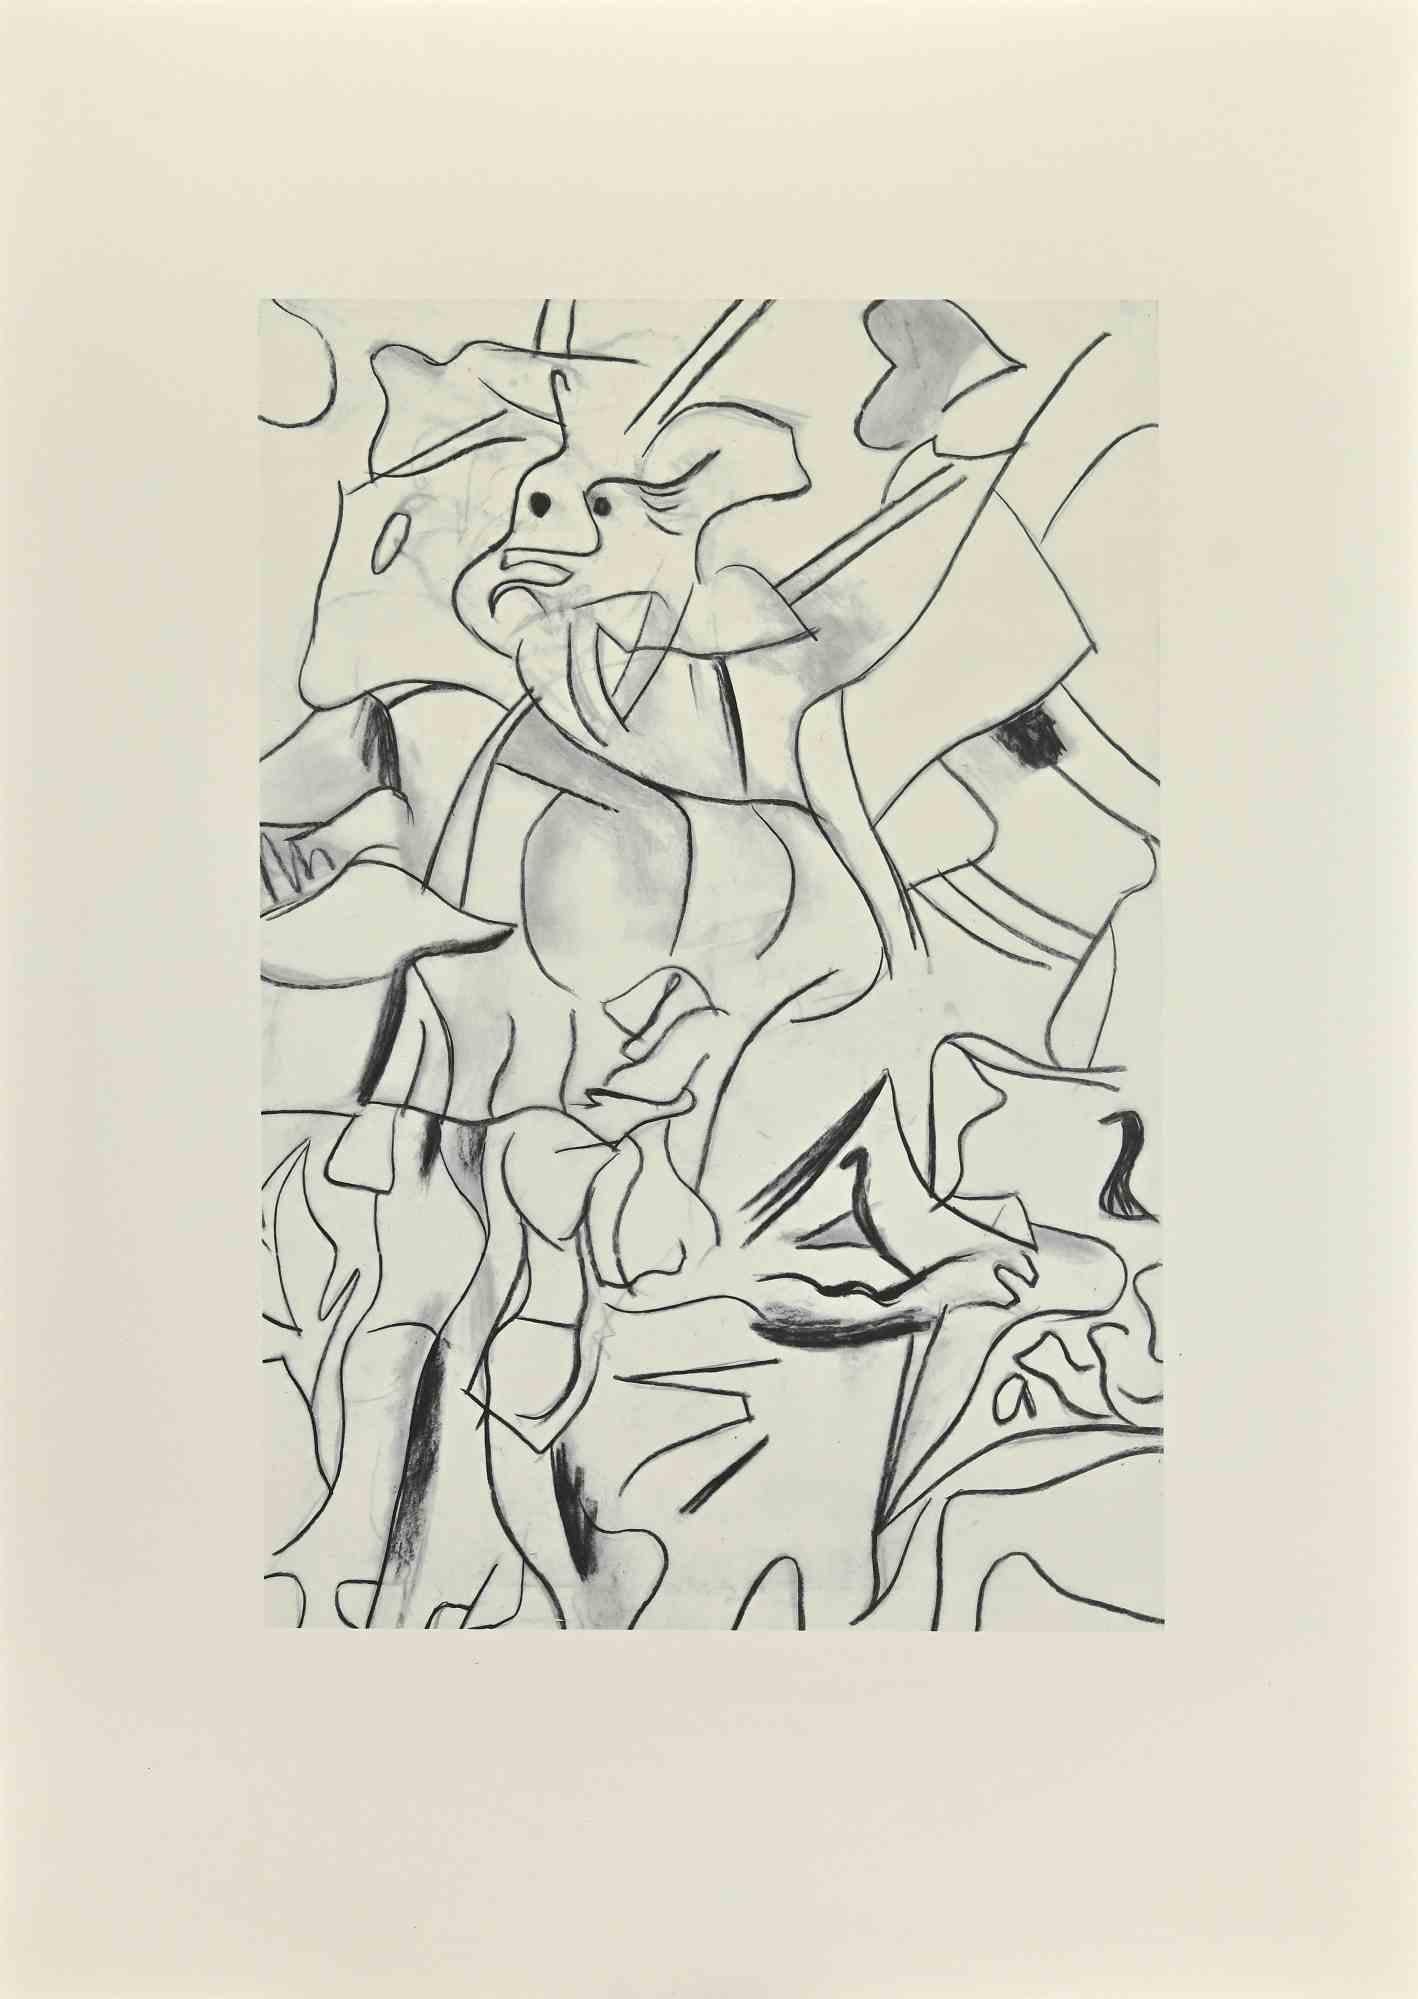 Willem de Kooning Abstract Print - Woman - Offset and Lithograph - 1983